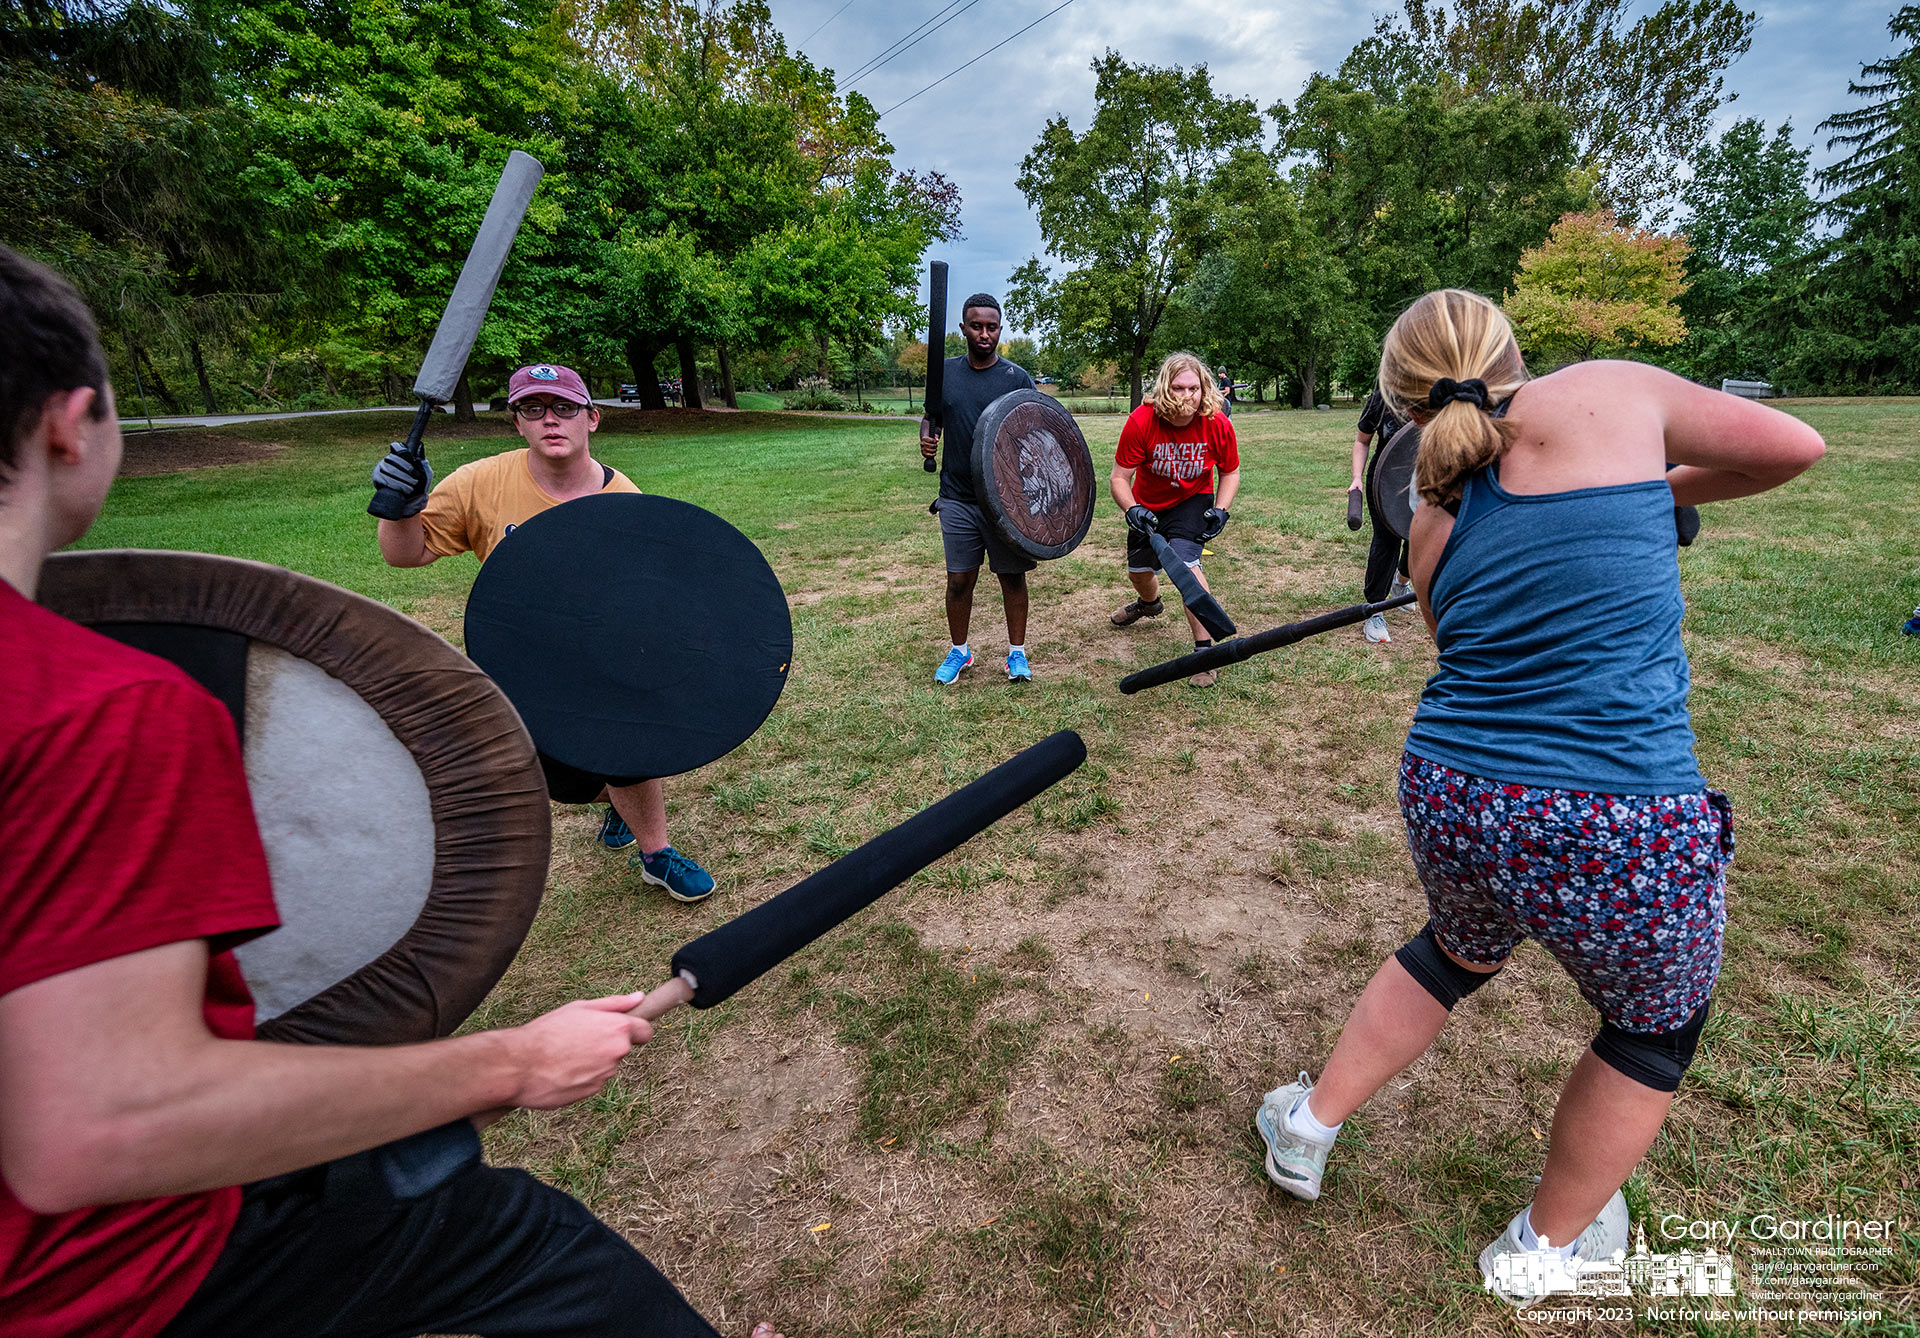 Medieval warriors strike with foam swords, lances, and projectiles during a series of battles Wednesday afternoon on the playing field at Alum Creek Park North. My Final Photo for September 27, 2023.